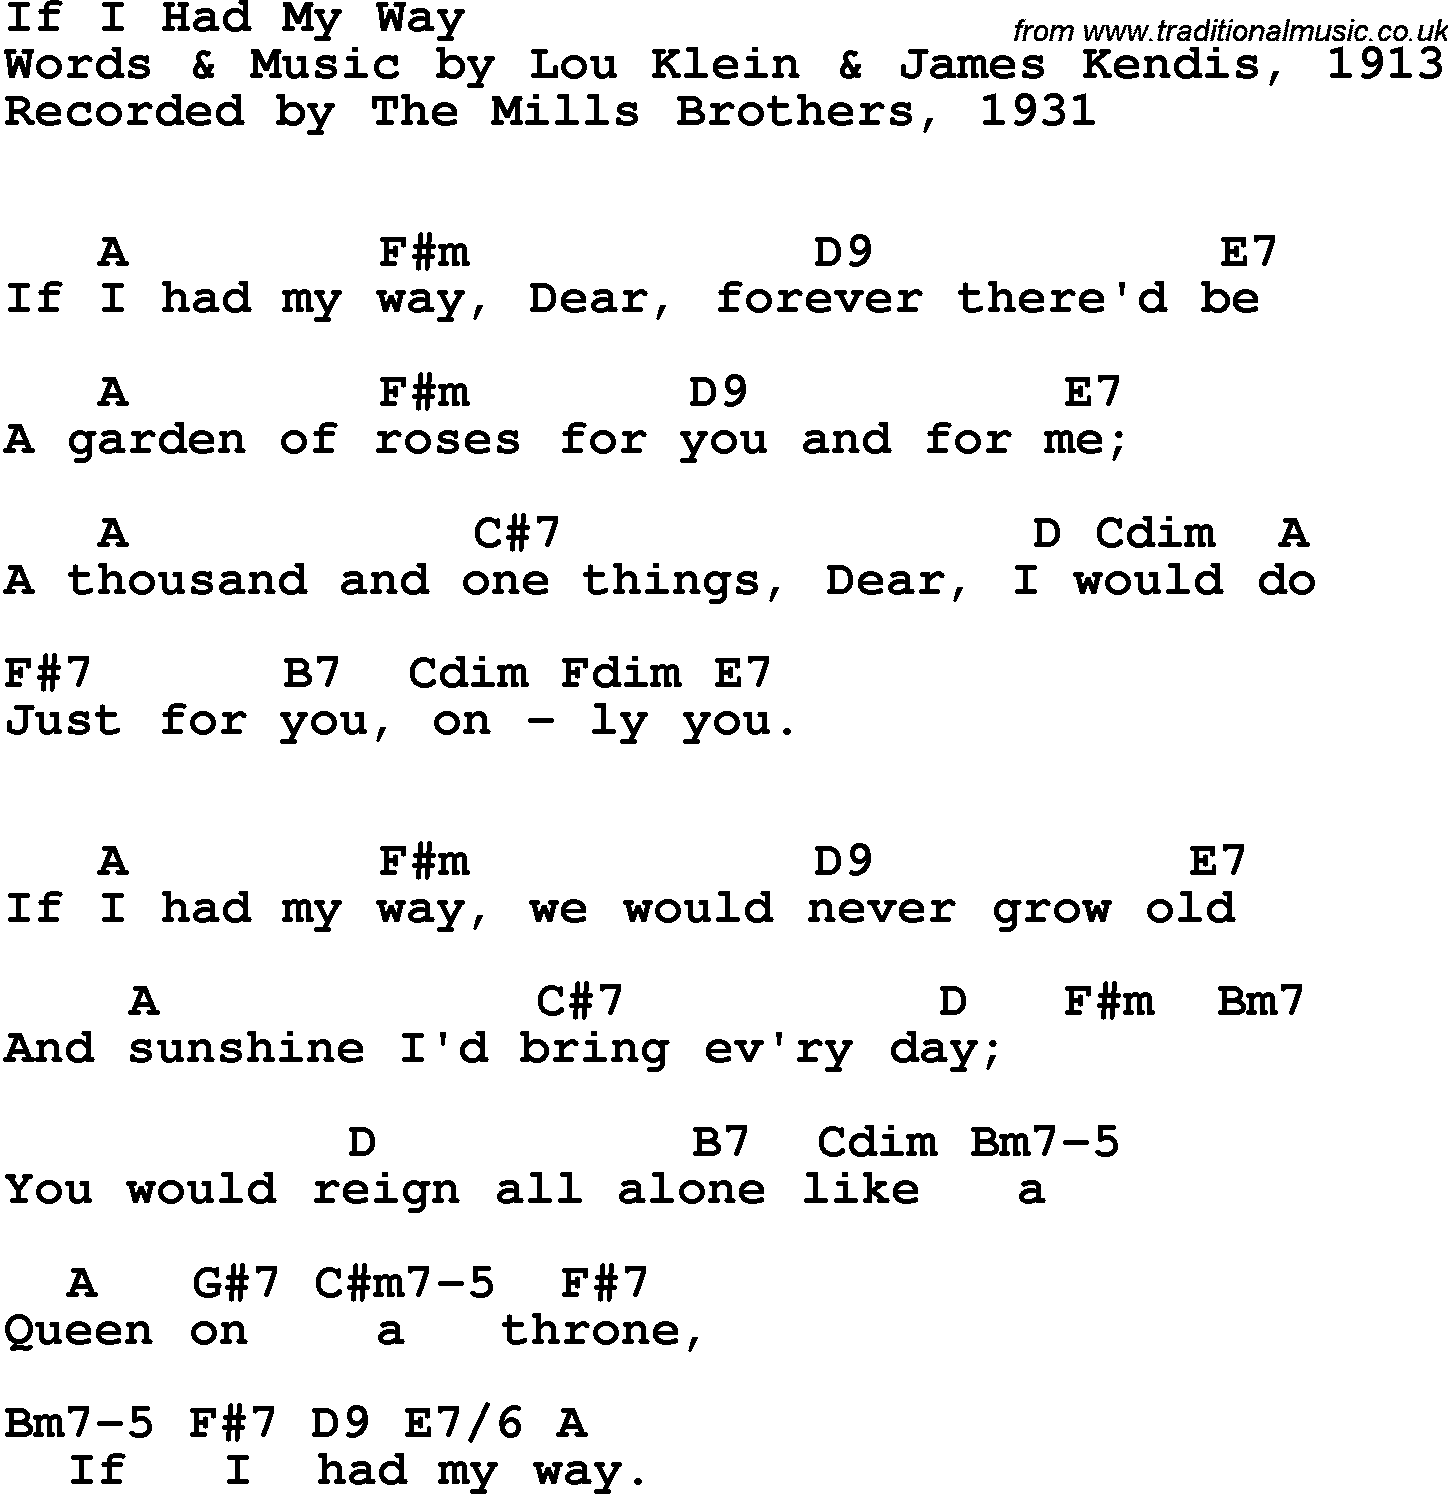 Song Lyrics with guitar chords for If I Had My Way - The Mills Brothers, 1931